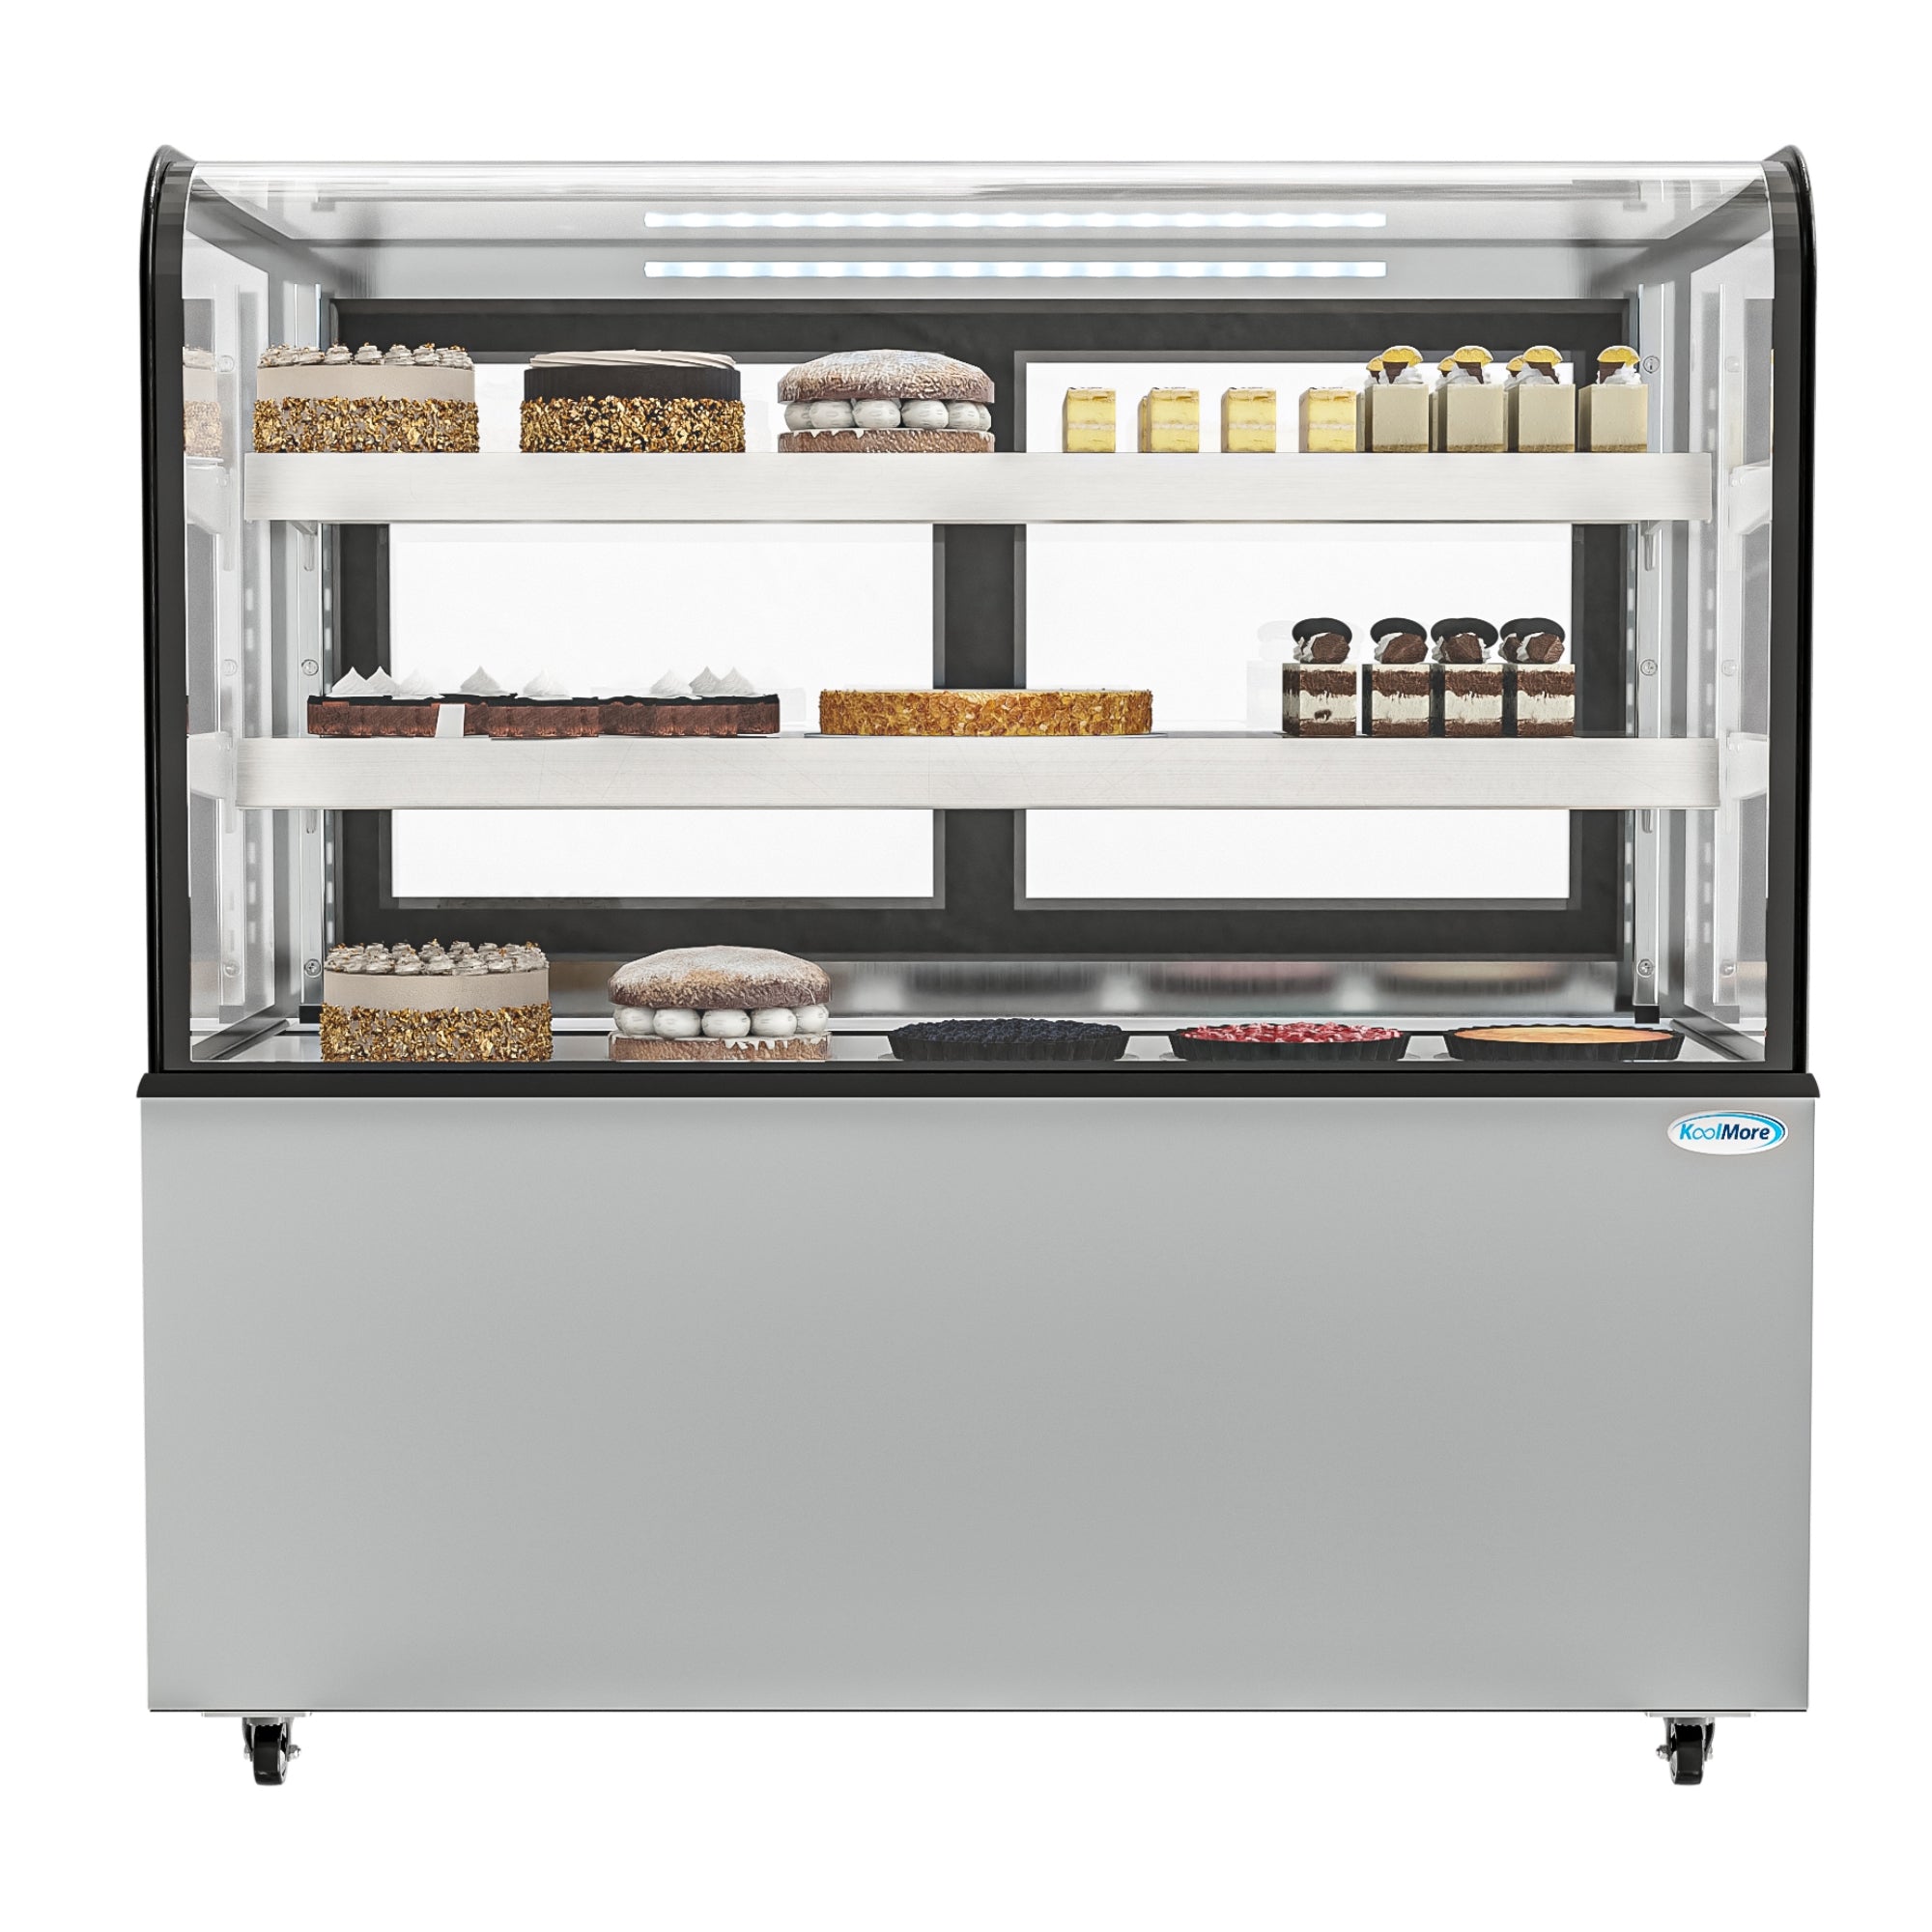 glass bakery display case